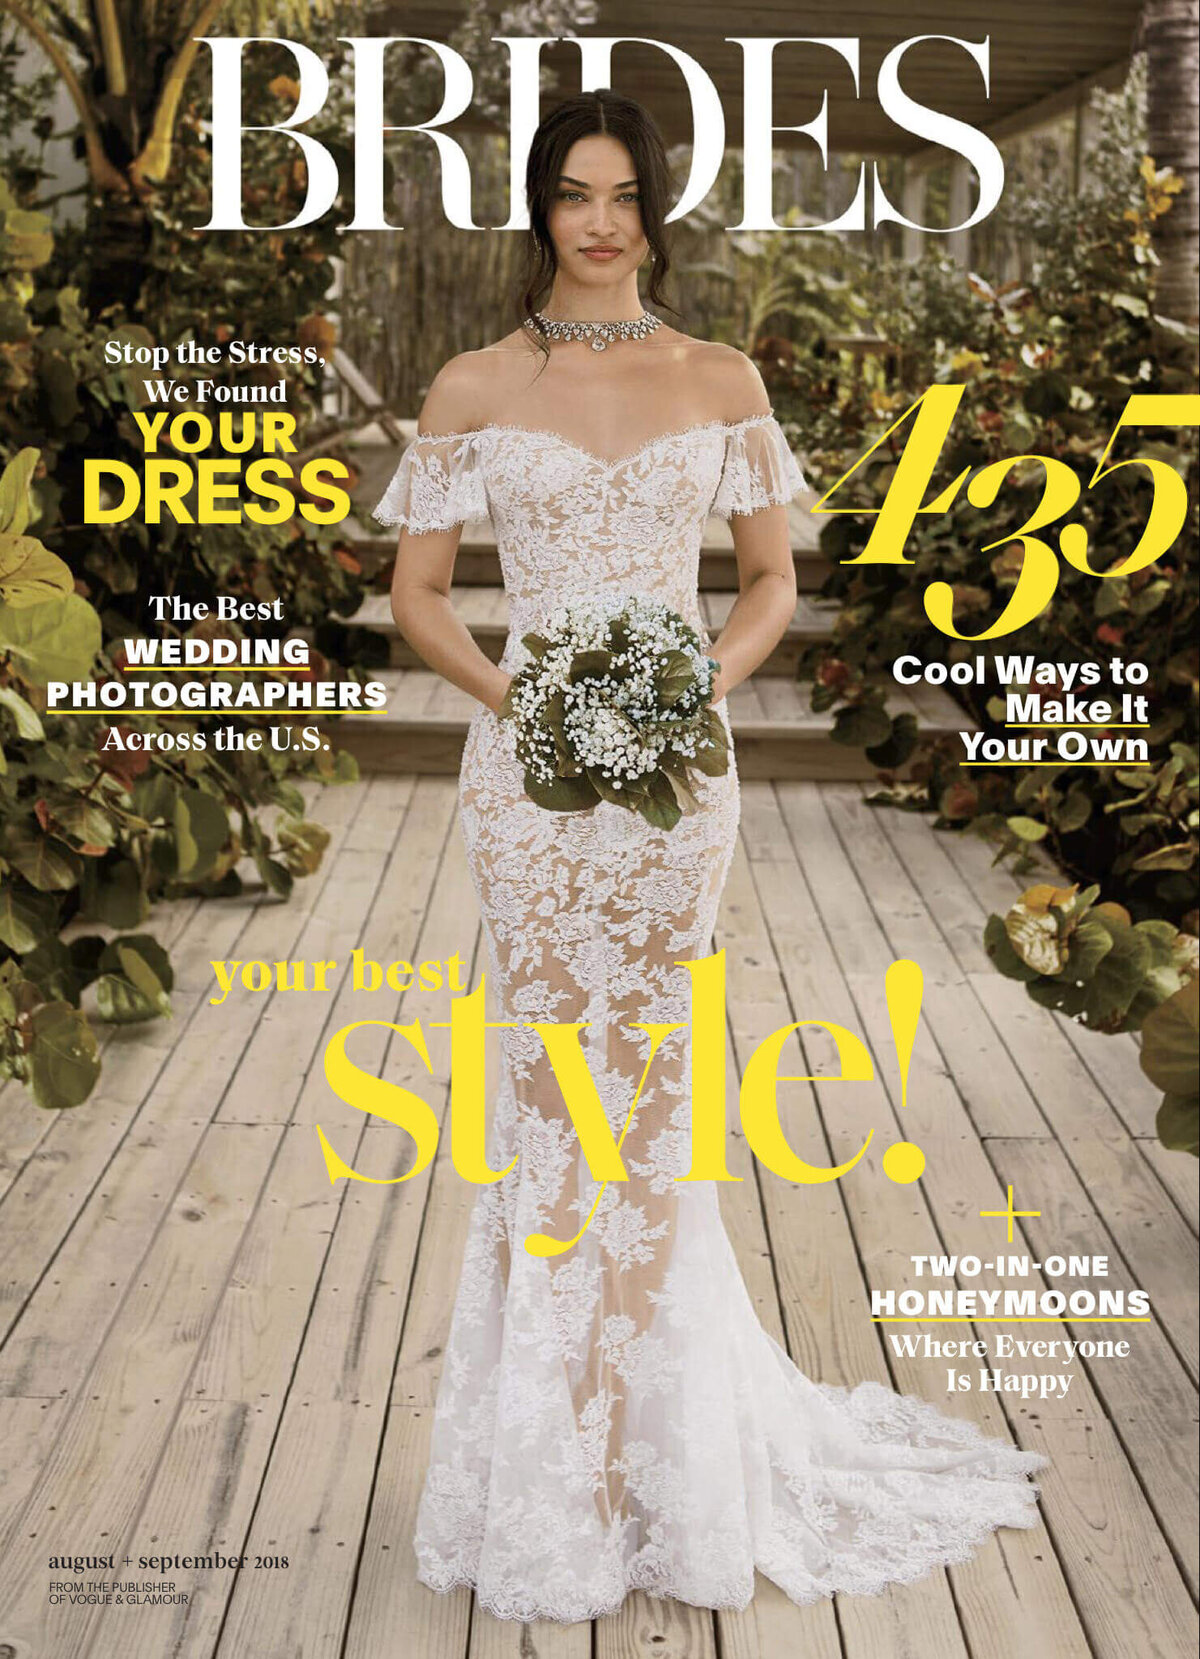 Brides magazine cover: The bride wearing her wedding gown, holding a flower bouquet with green leaves. Image by Jenny Fu Studio